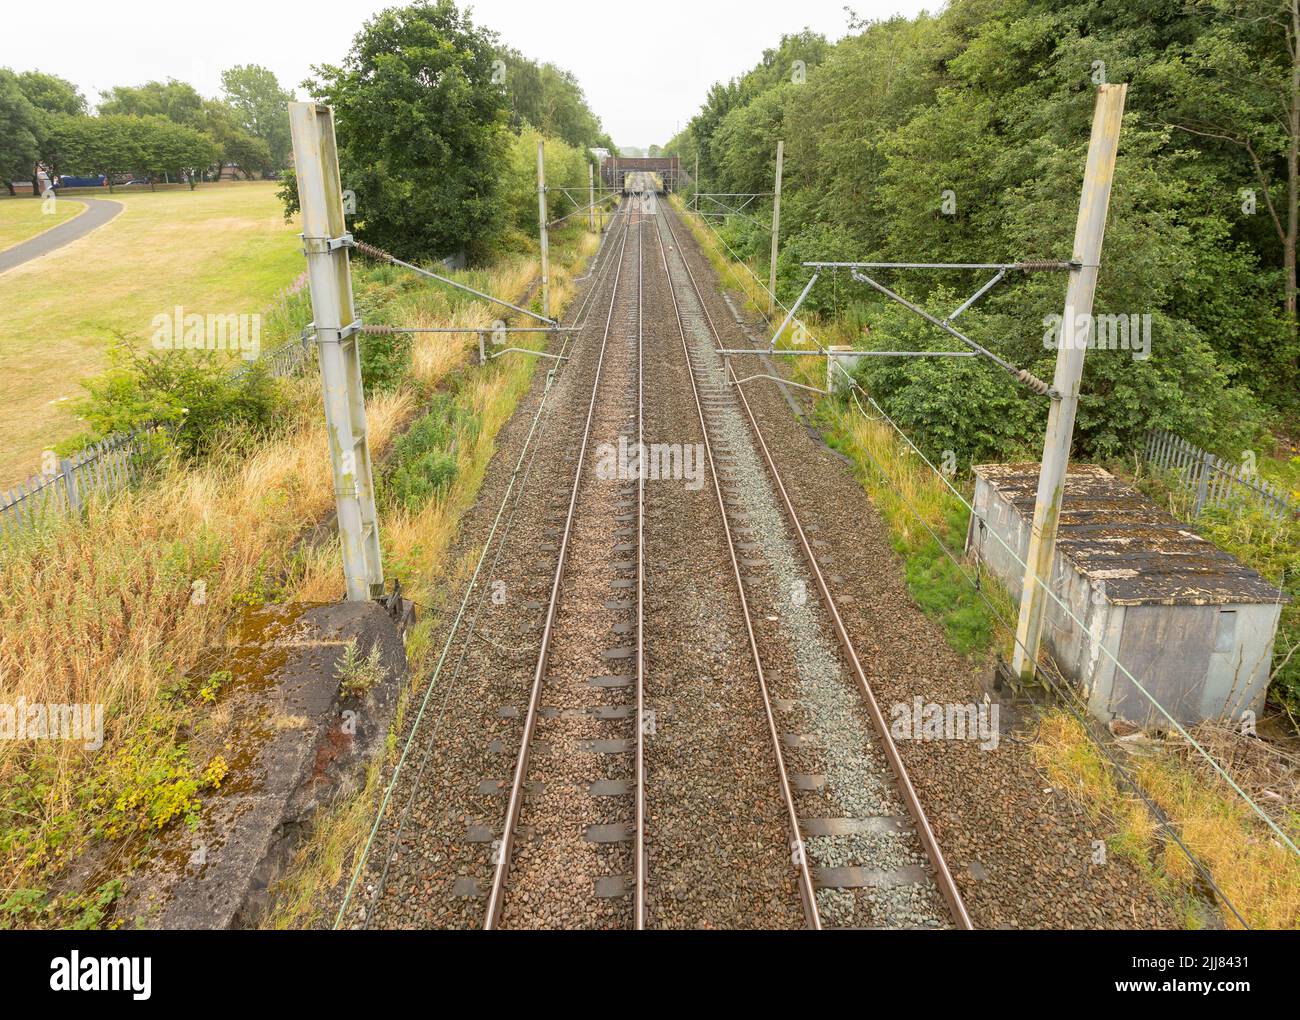 train tracks at longport station going of to the distance towards stoke on trent showing the Overhead line equipment shot from above Stock Photo